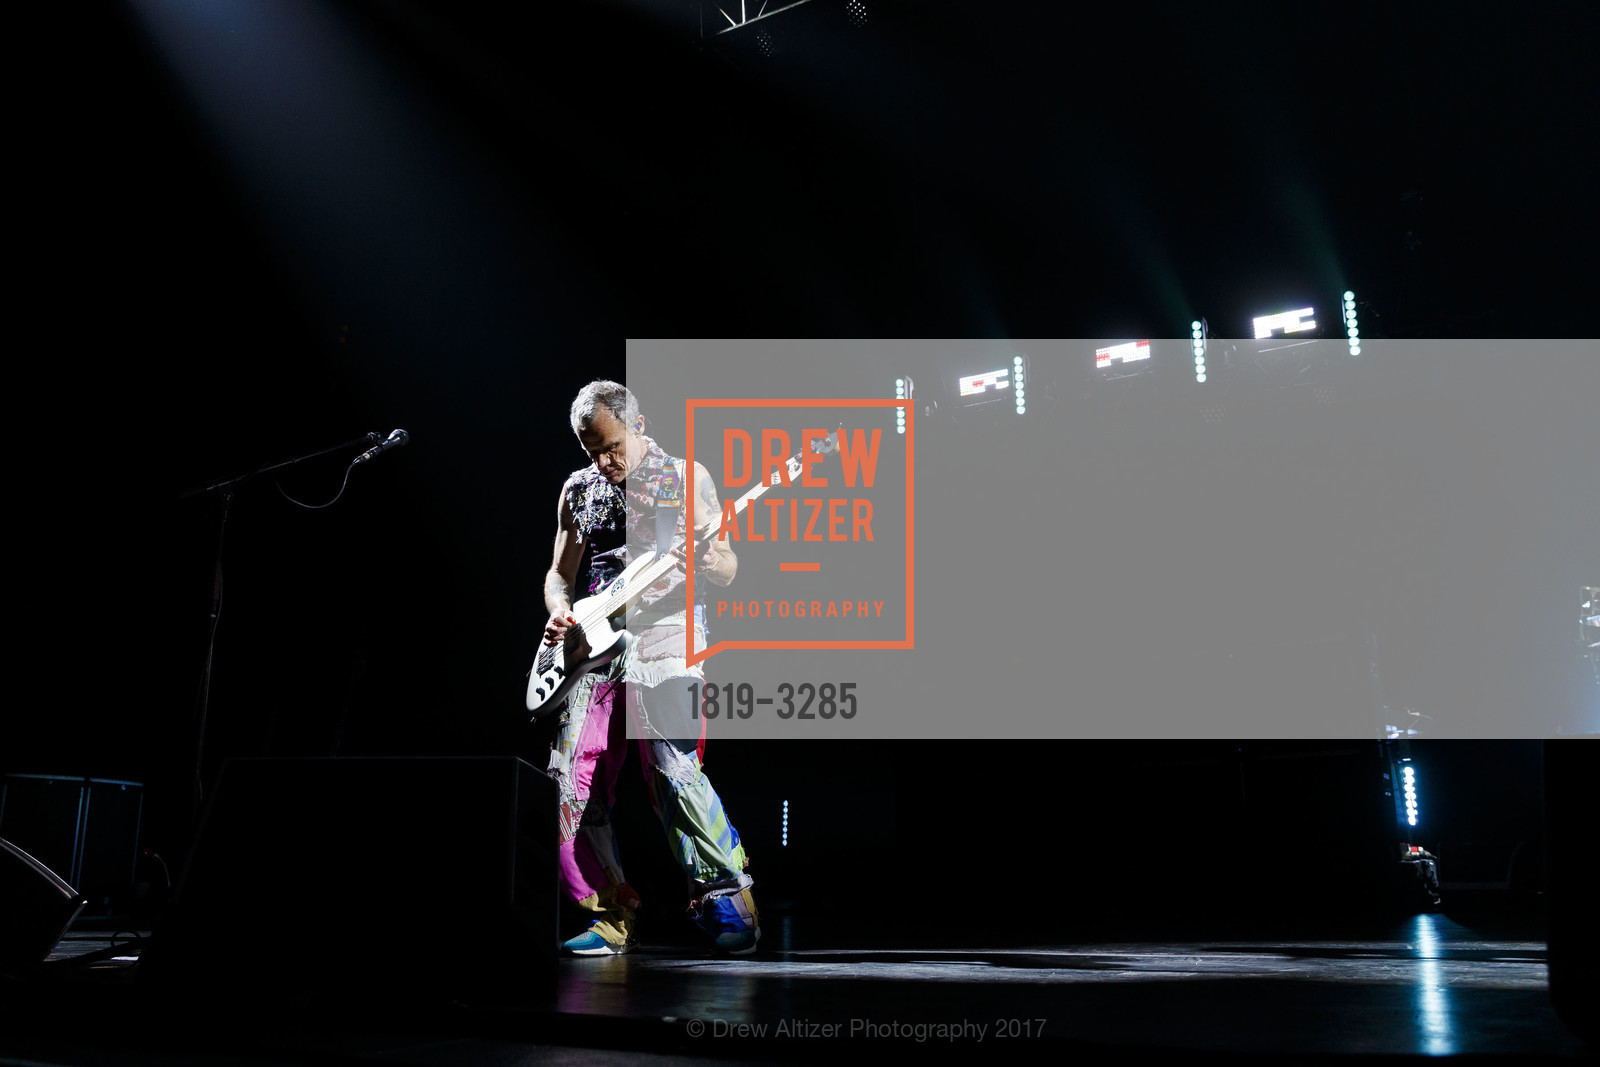 The Red Hot Chili Peppers, Photo #1819-3285